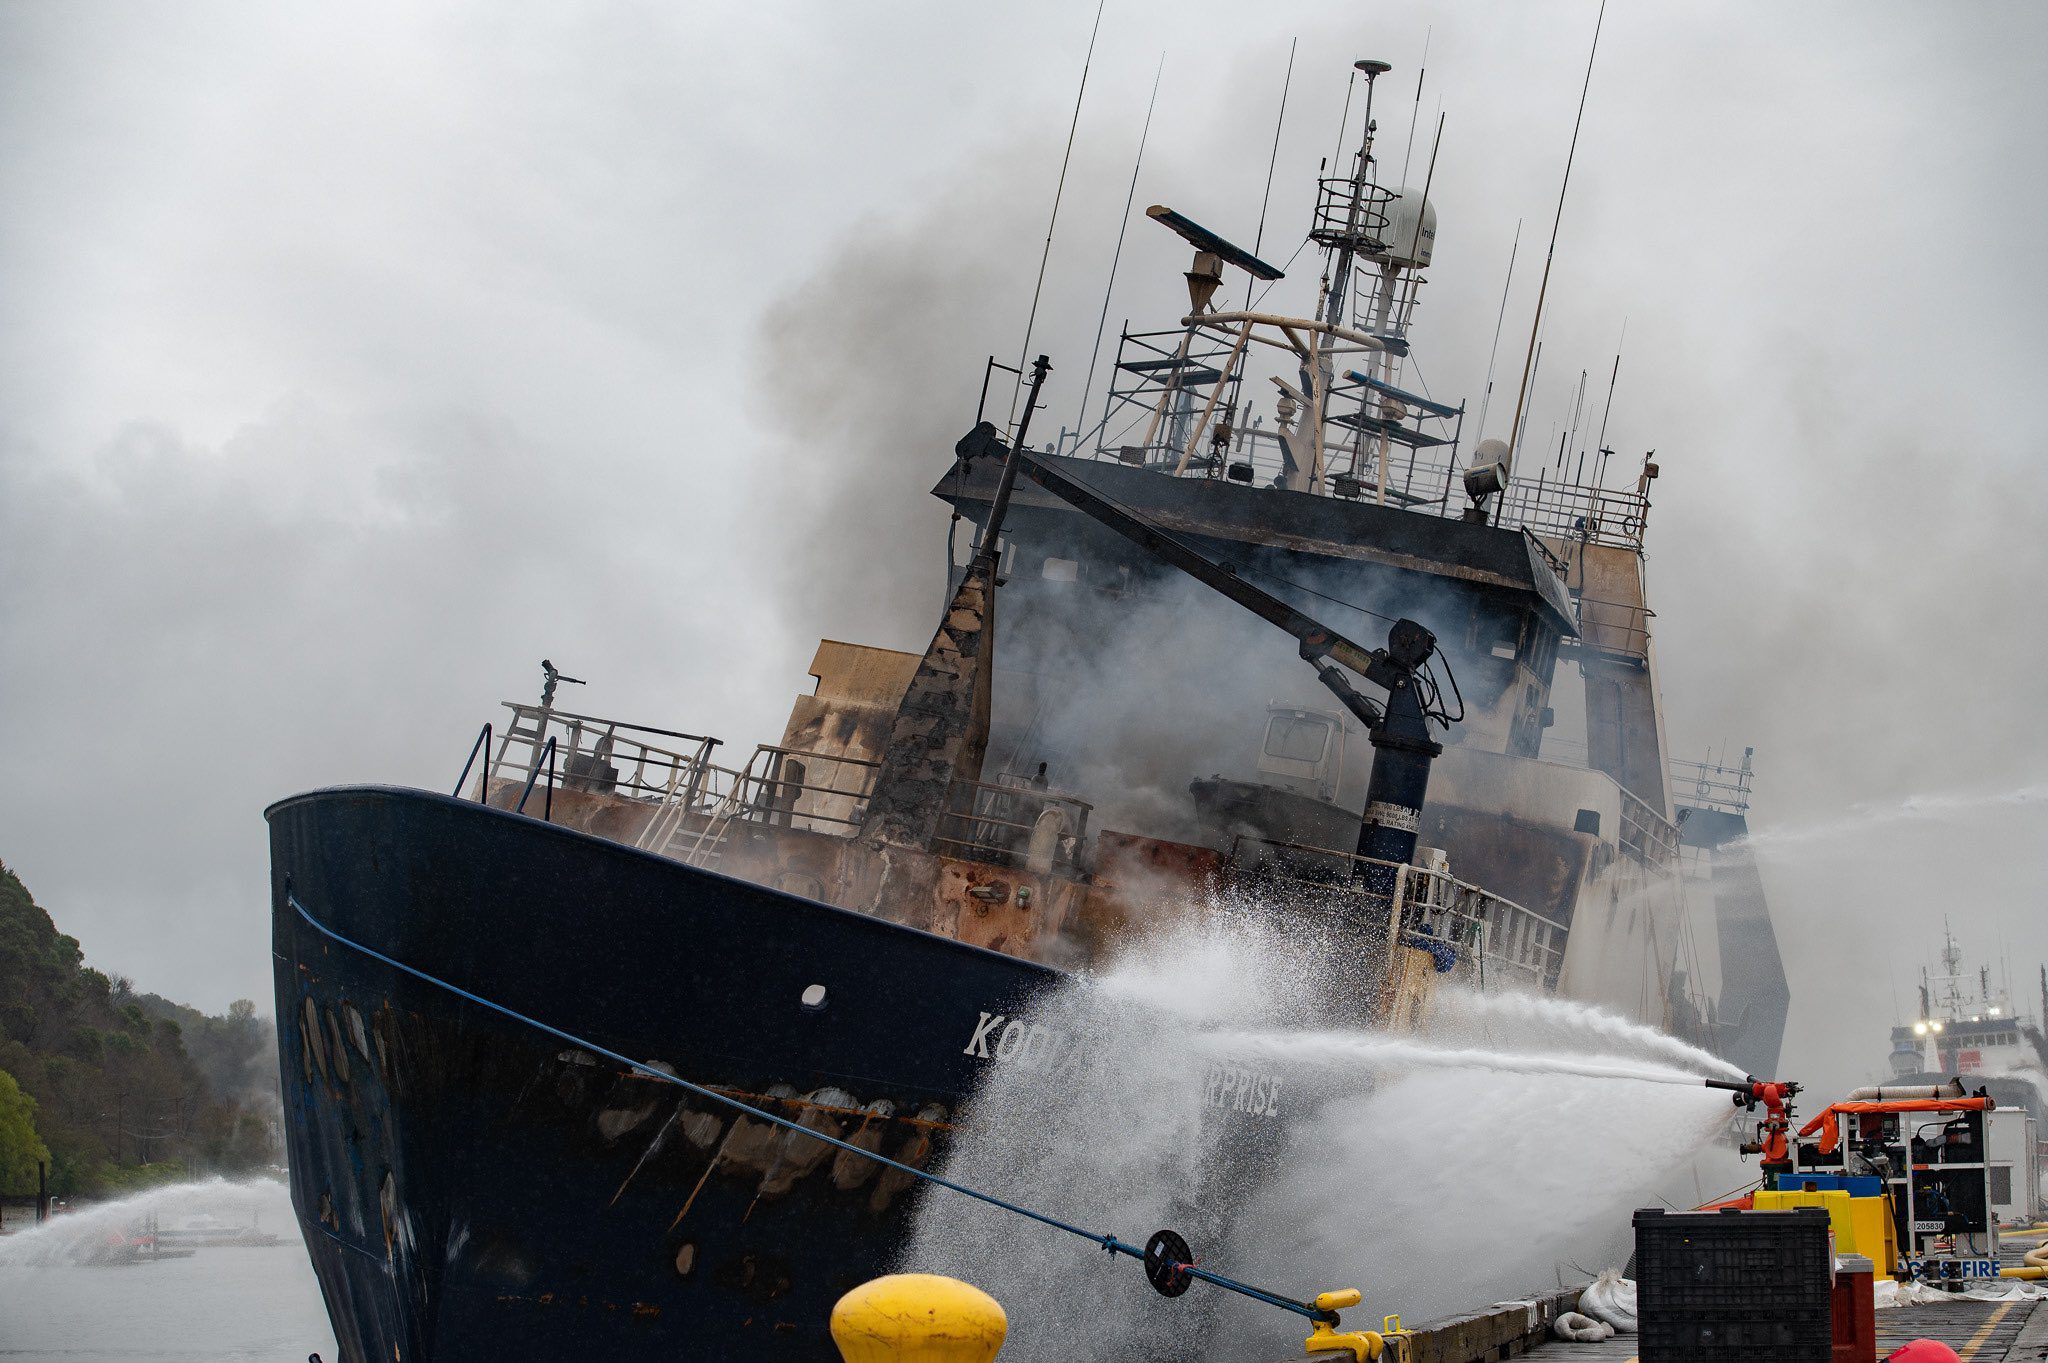 Trident Seafoods Fishing Trawler Catches Fire in Tacoma